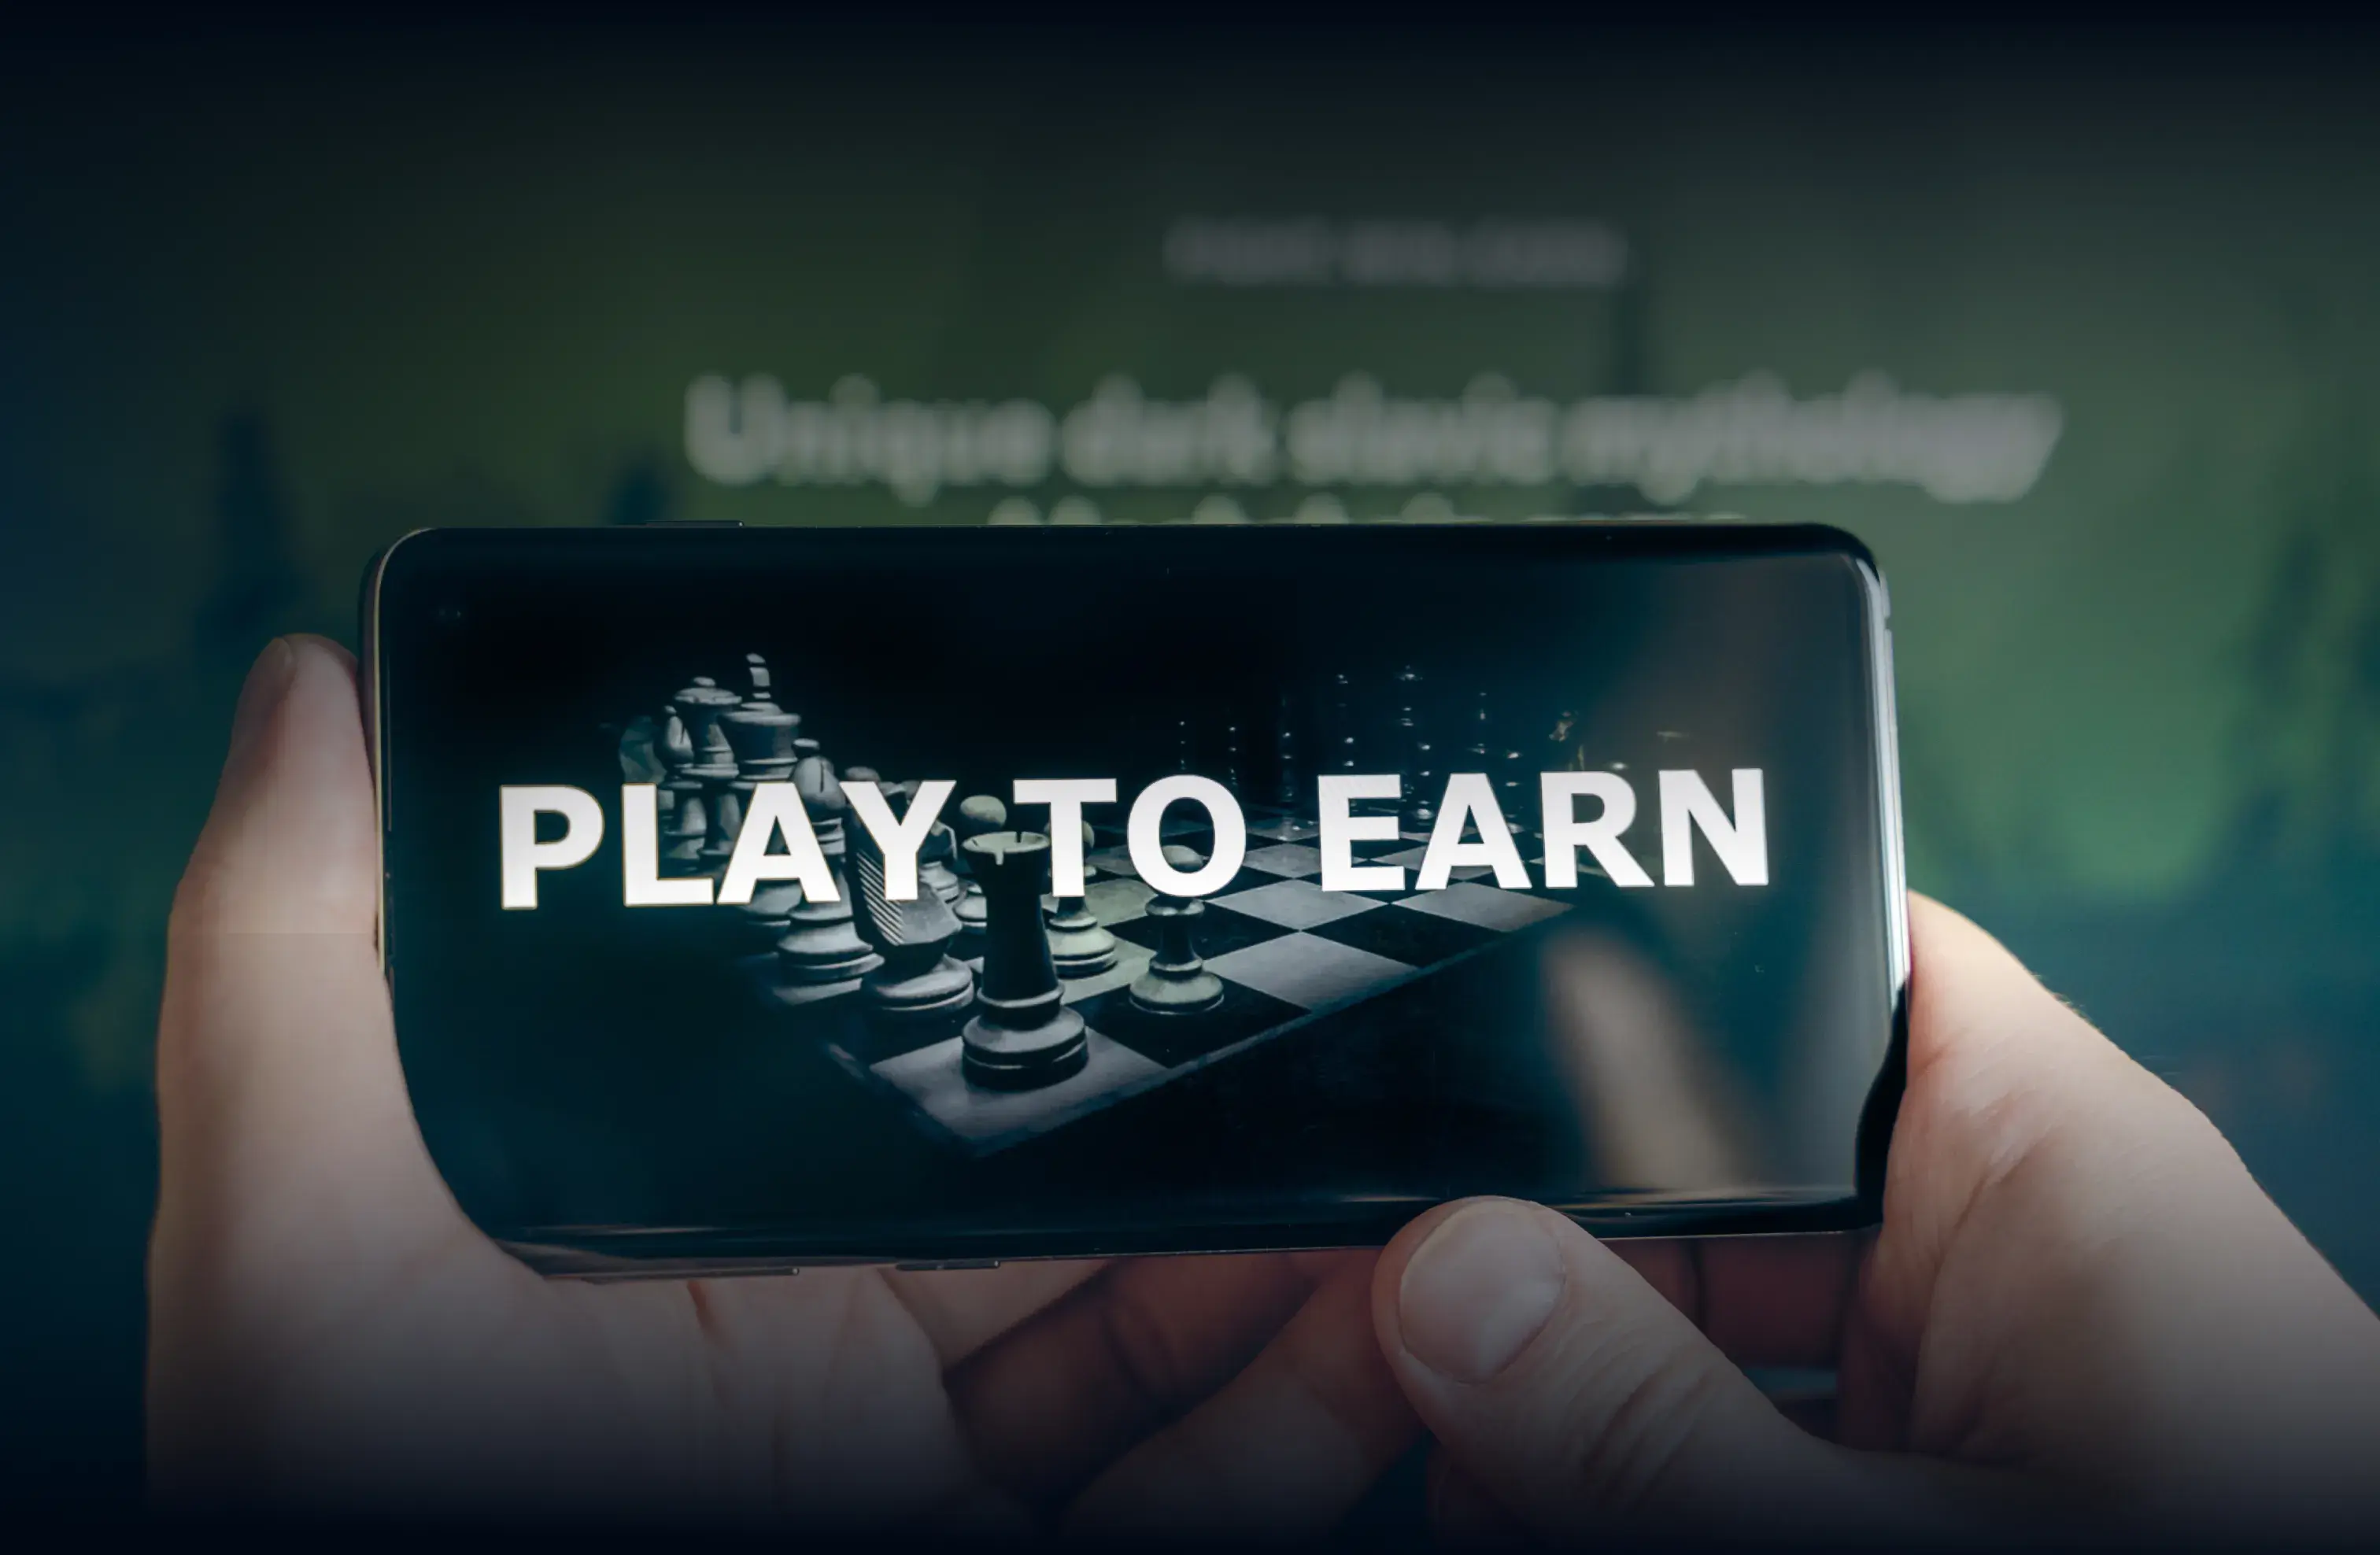 Play to Earn Game Development